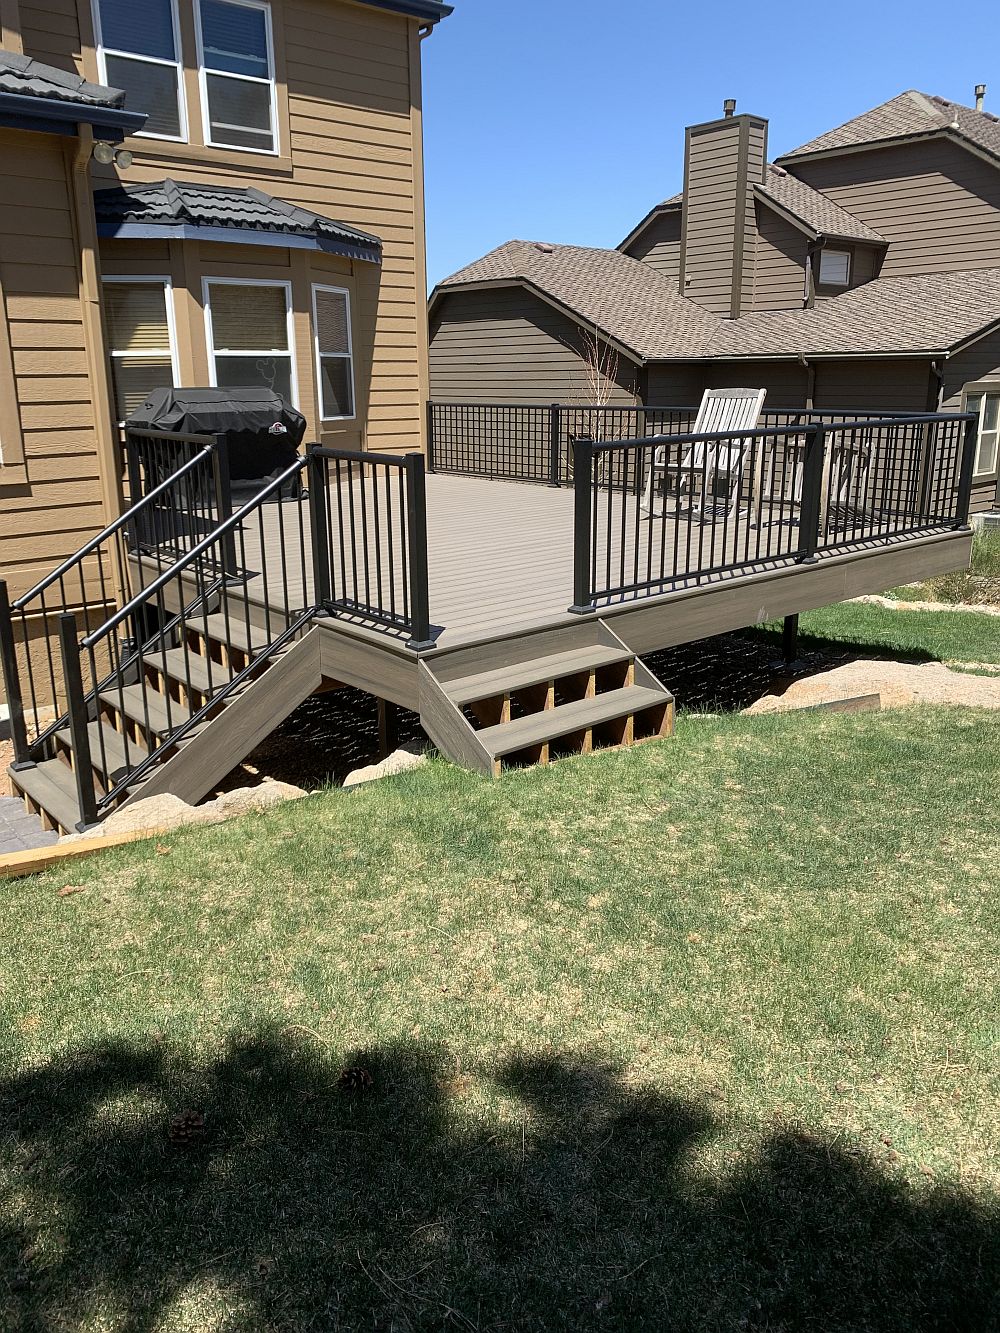 Two 4-'wide staircases on a composite deck